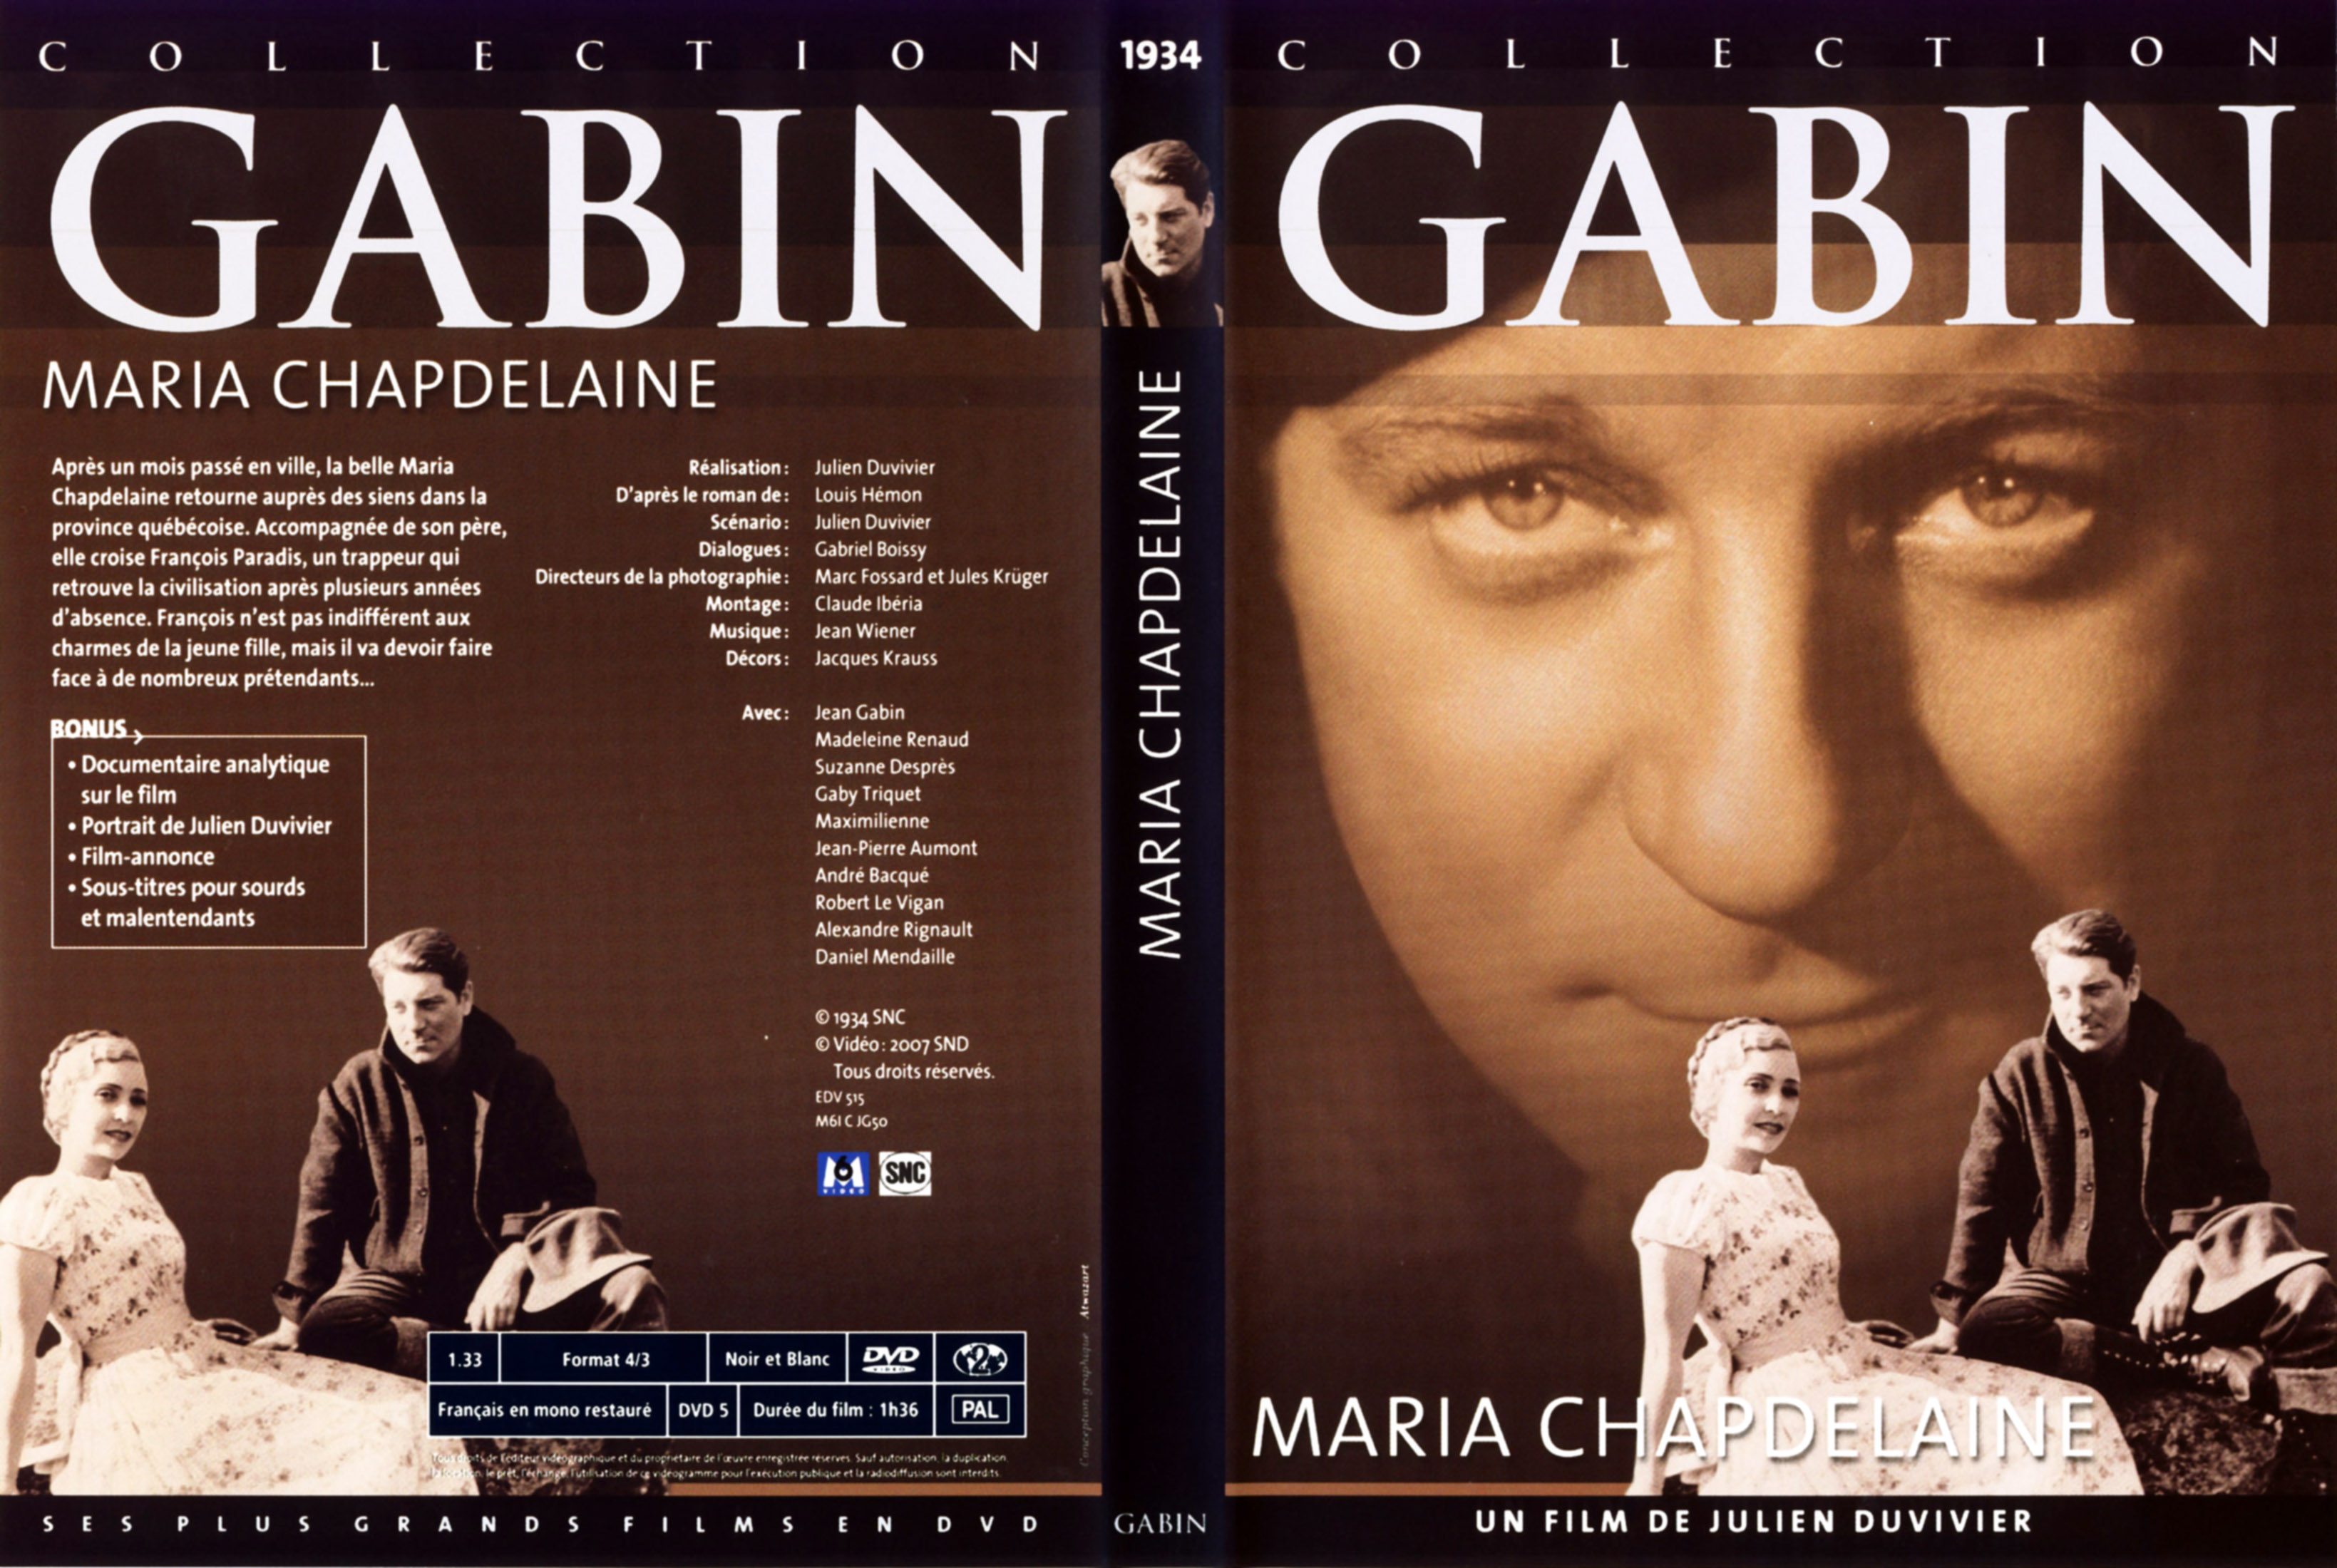 Jaquette DVD Maria Chapdelaine